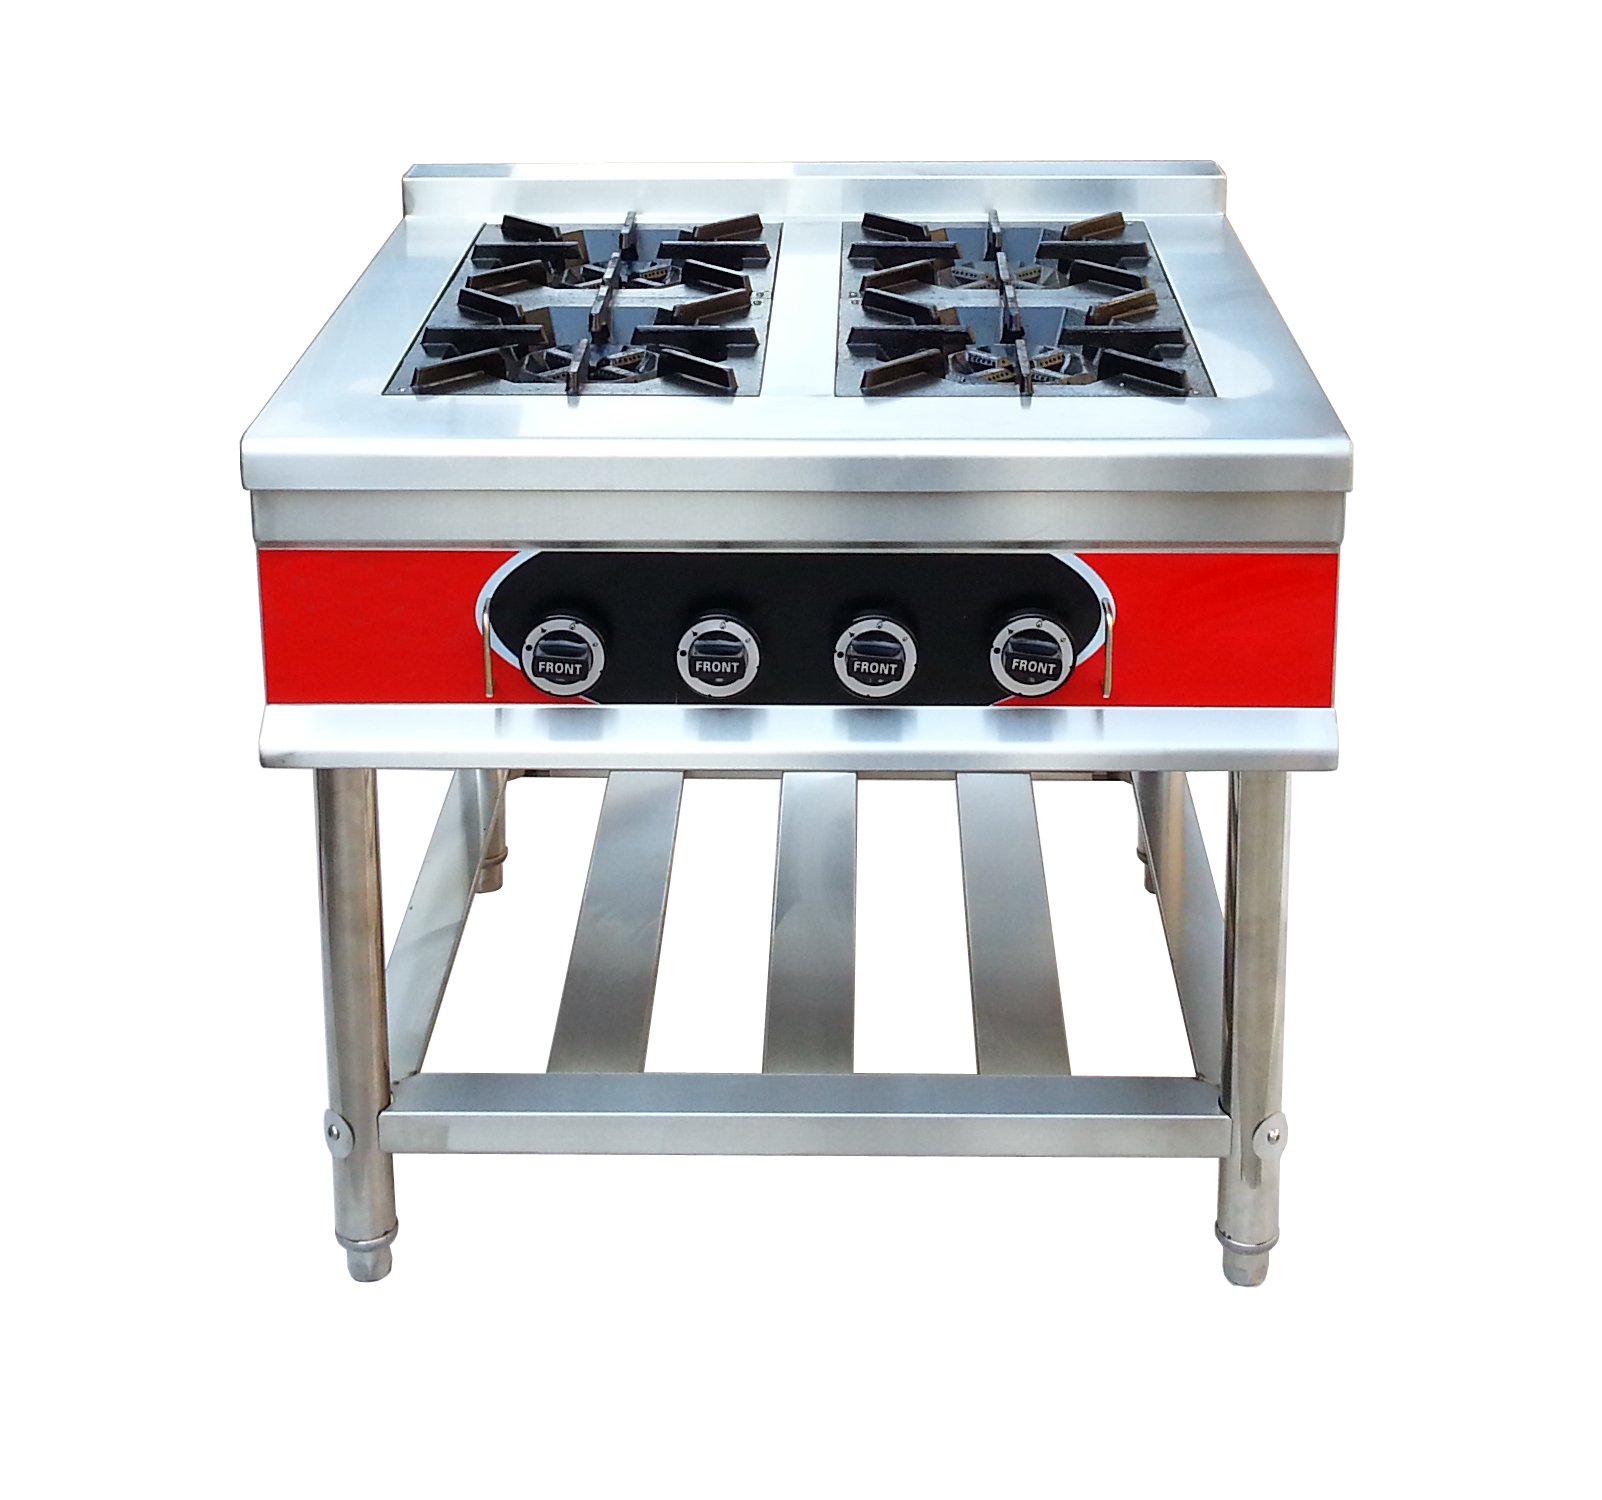 GRT-4W Stainless Steel Free Standing 4 Burner Gas Stove